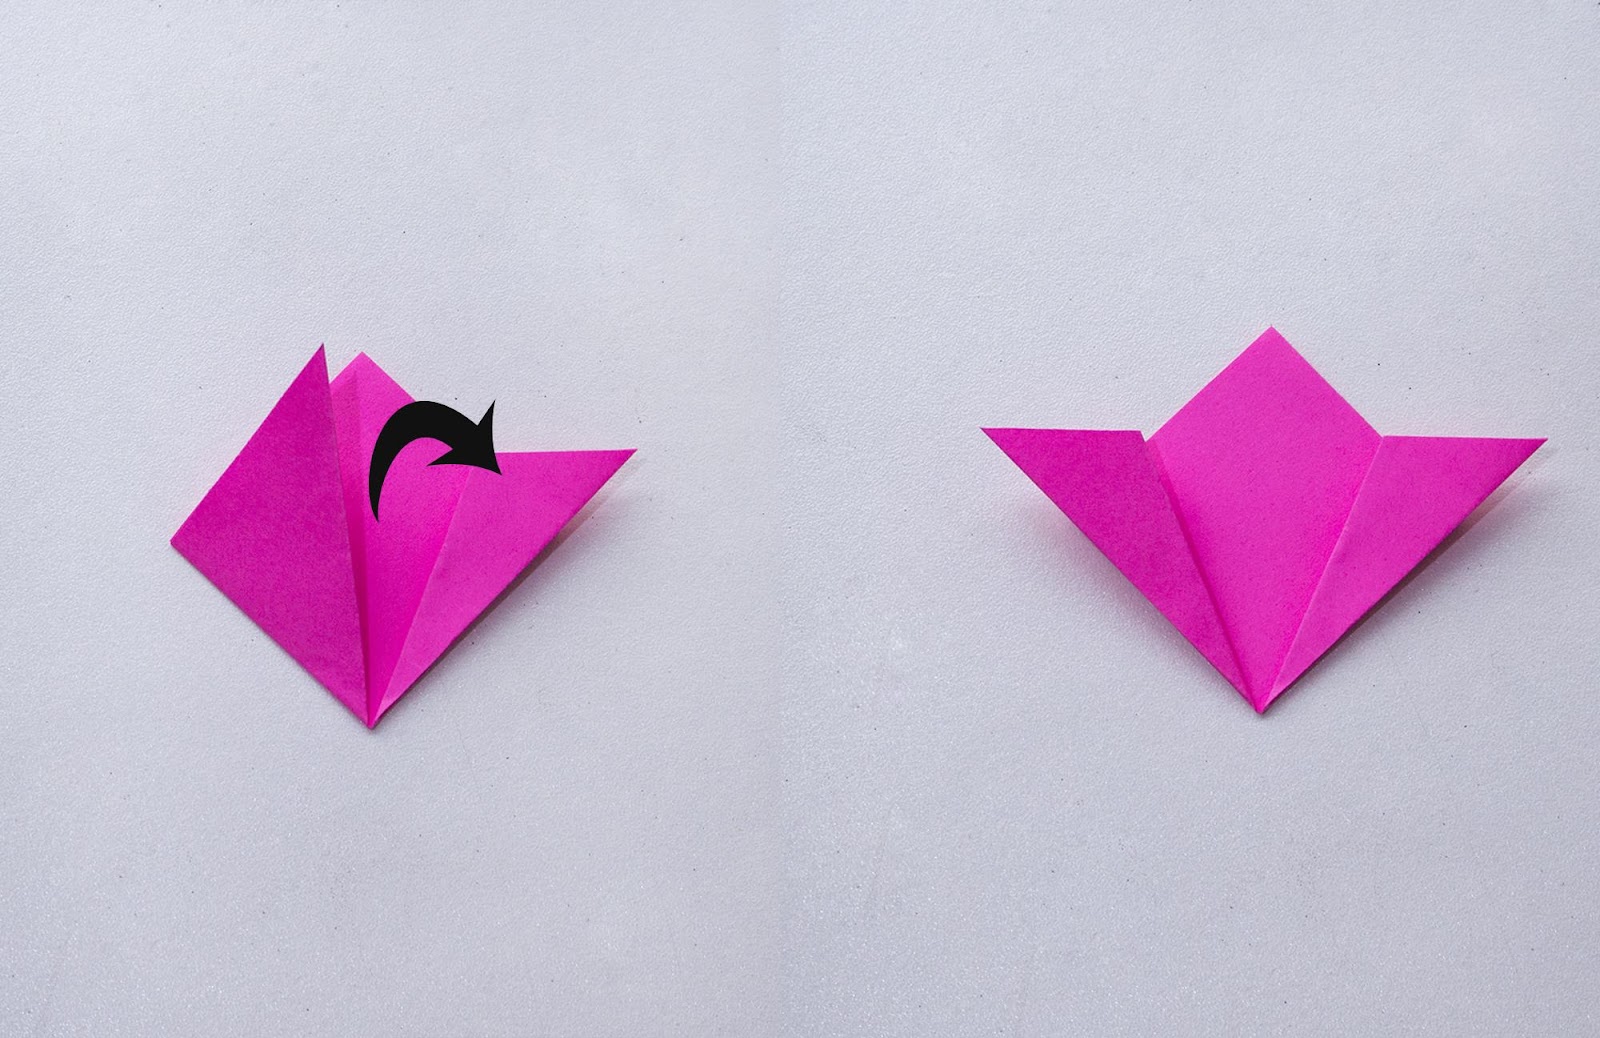 A sheet of pink  paper is being folded. A black arrow indicates which direction to fold